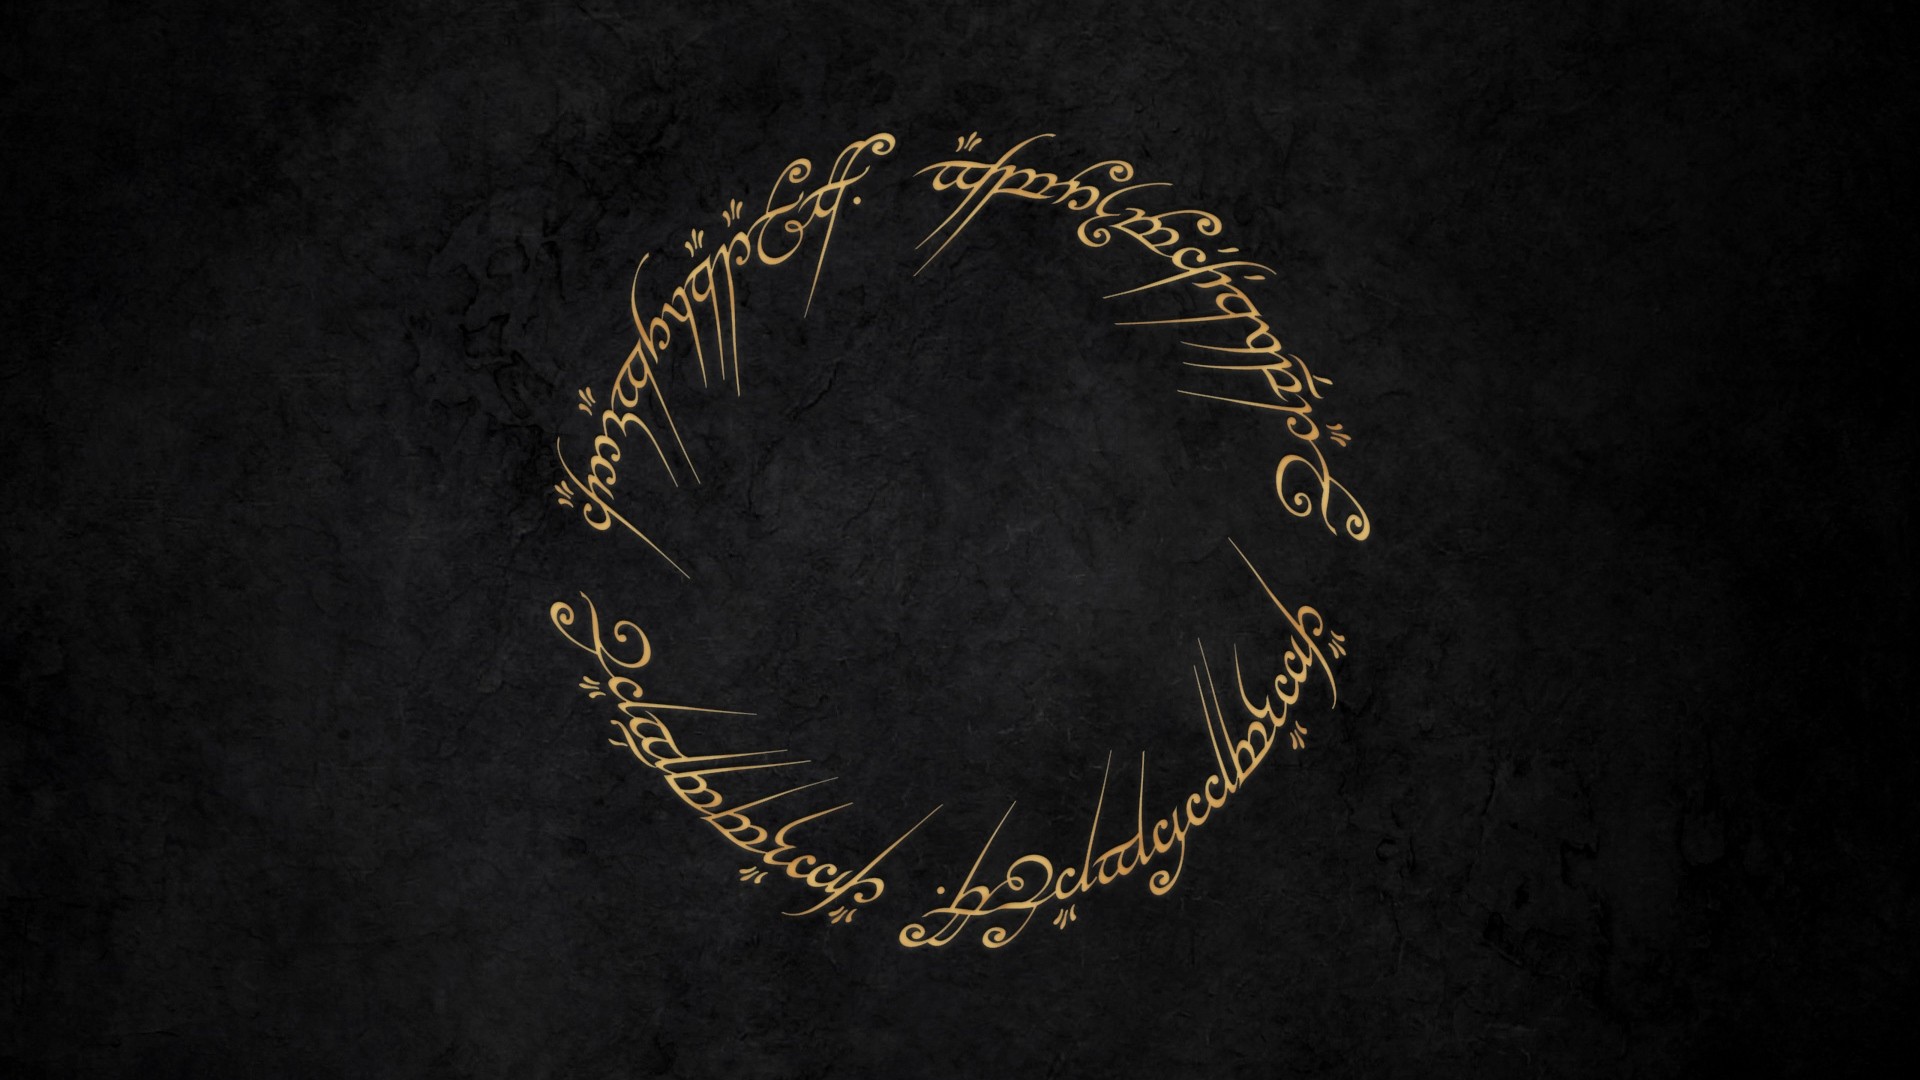 General 1920x1080 The Lord of the Rings The One Ring typography